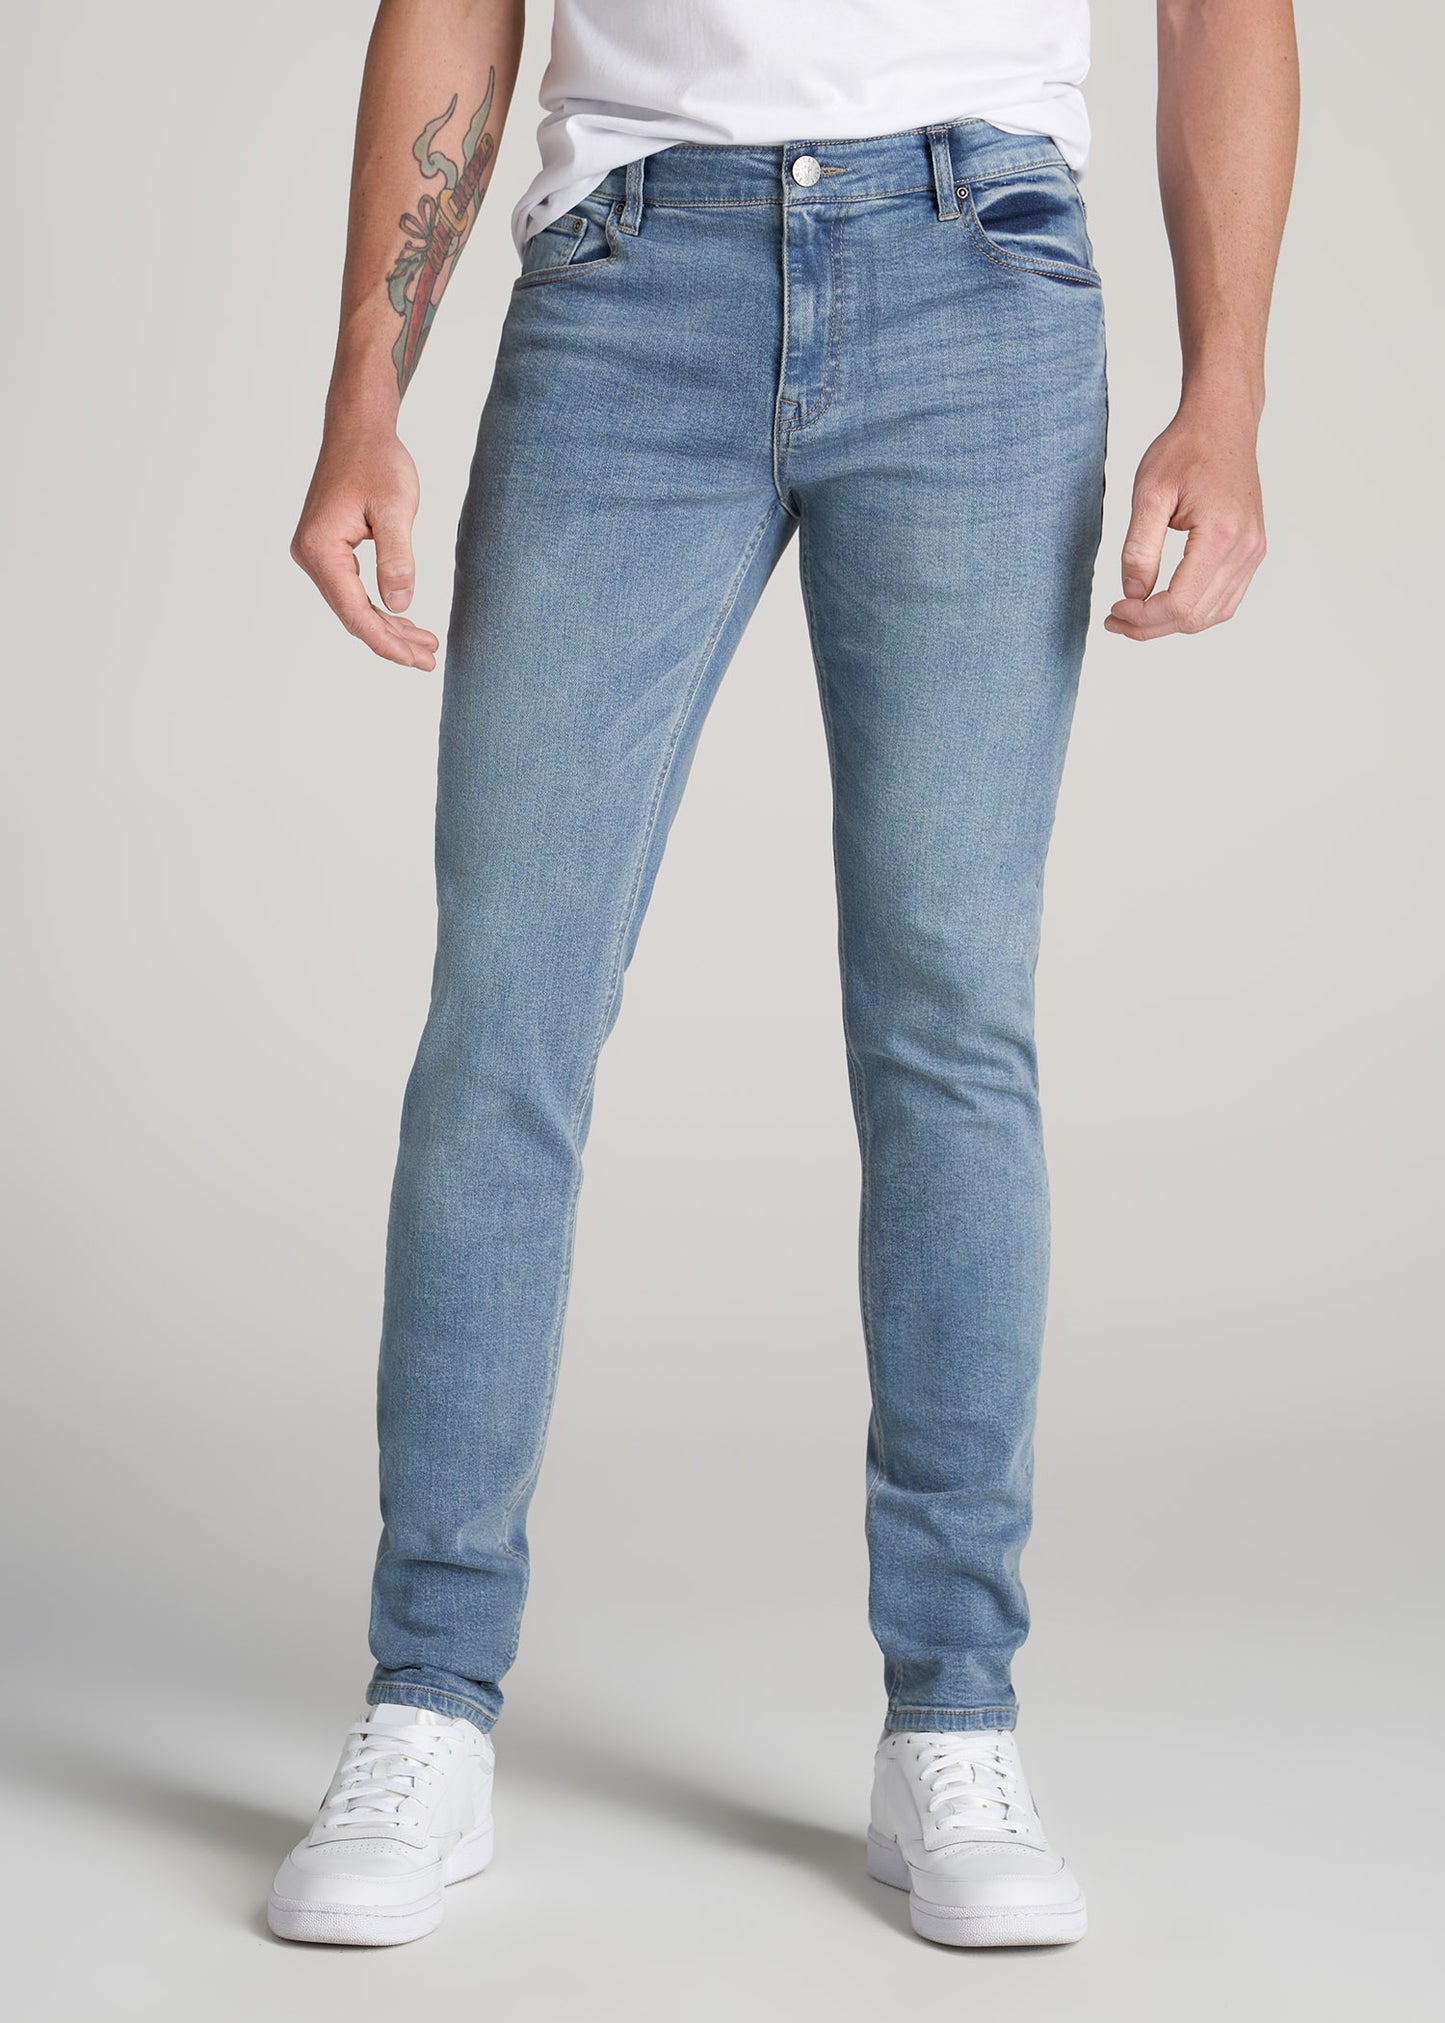 A tall man wearing American Tall's Travis Skinny Jeans for Tall Men in New Fade.